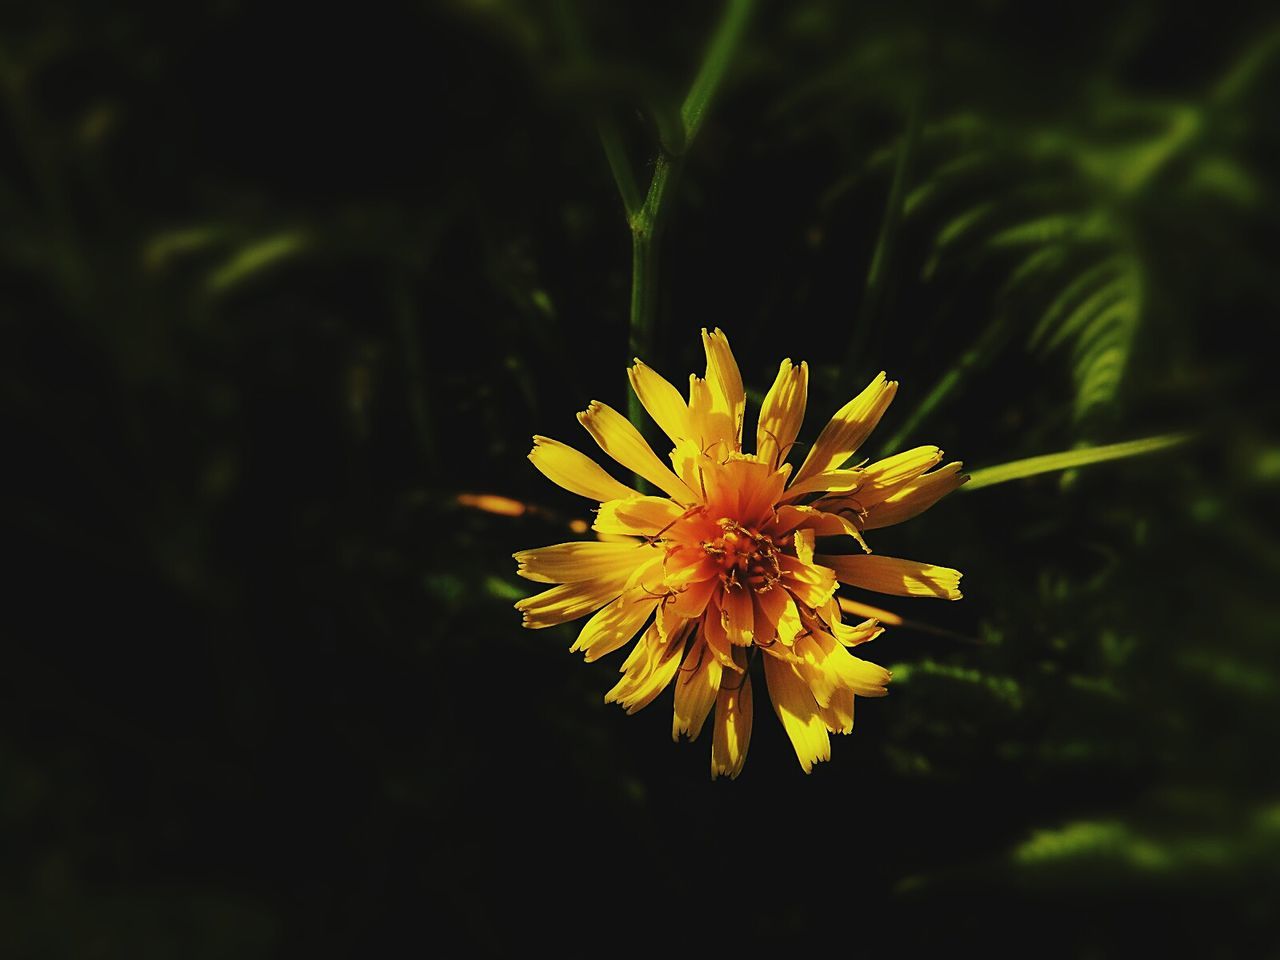 Yellow flower blooming outdoors